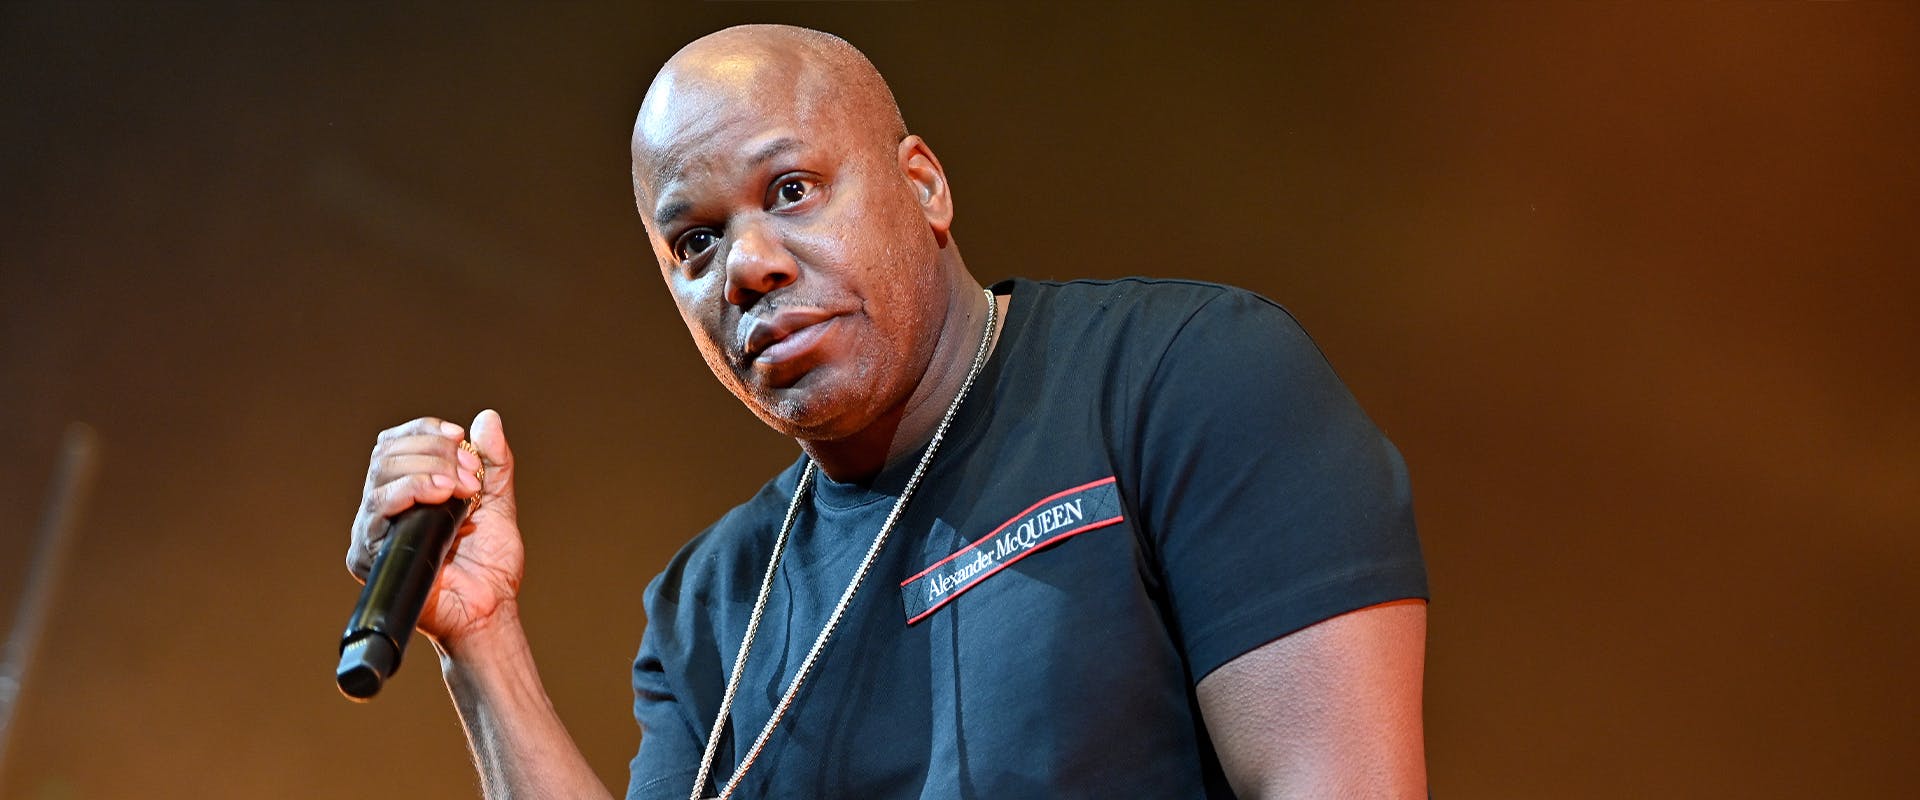 Too $hort Debuted His 'Freaky Tales' Film at the Sundance Film Festival